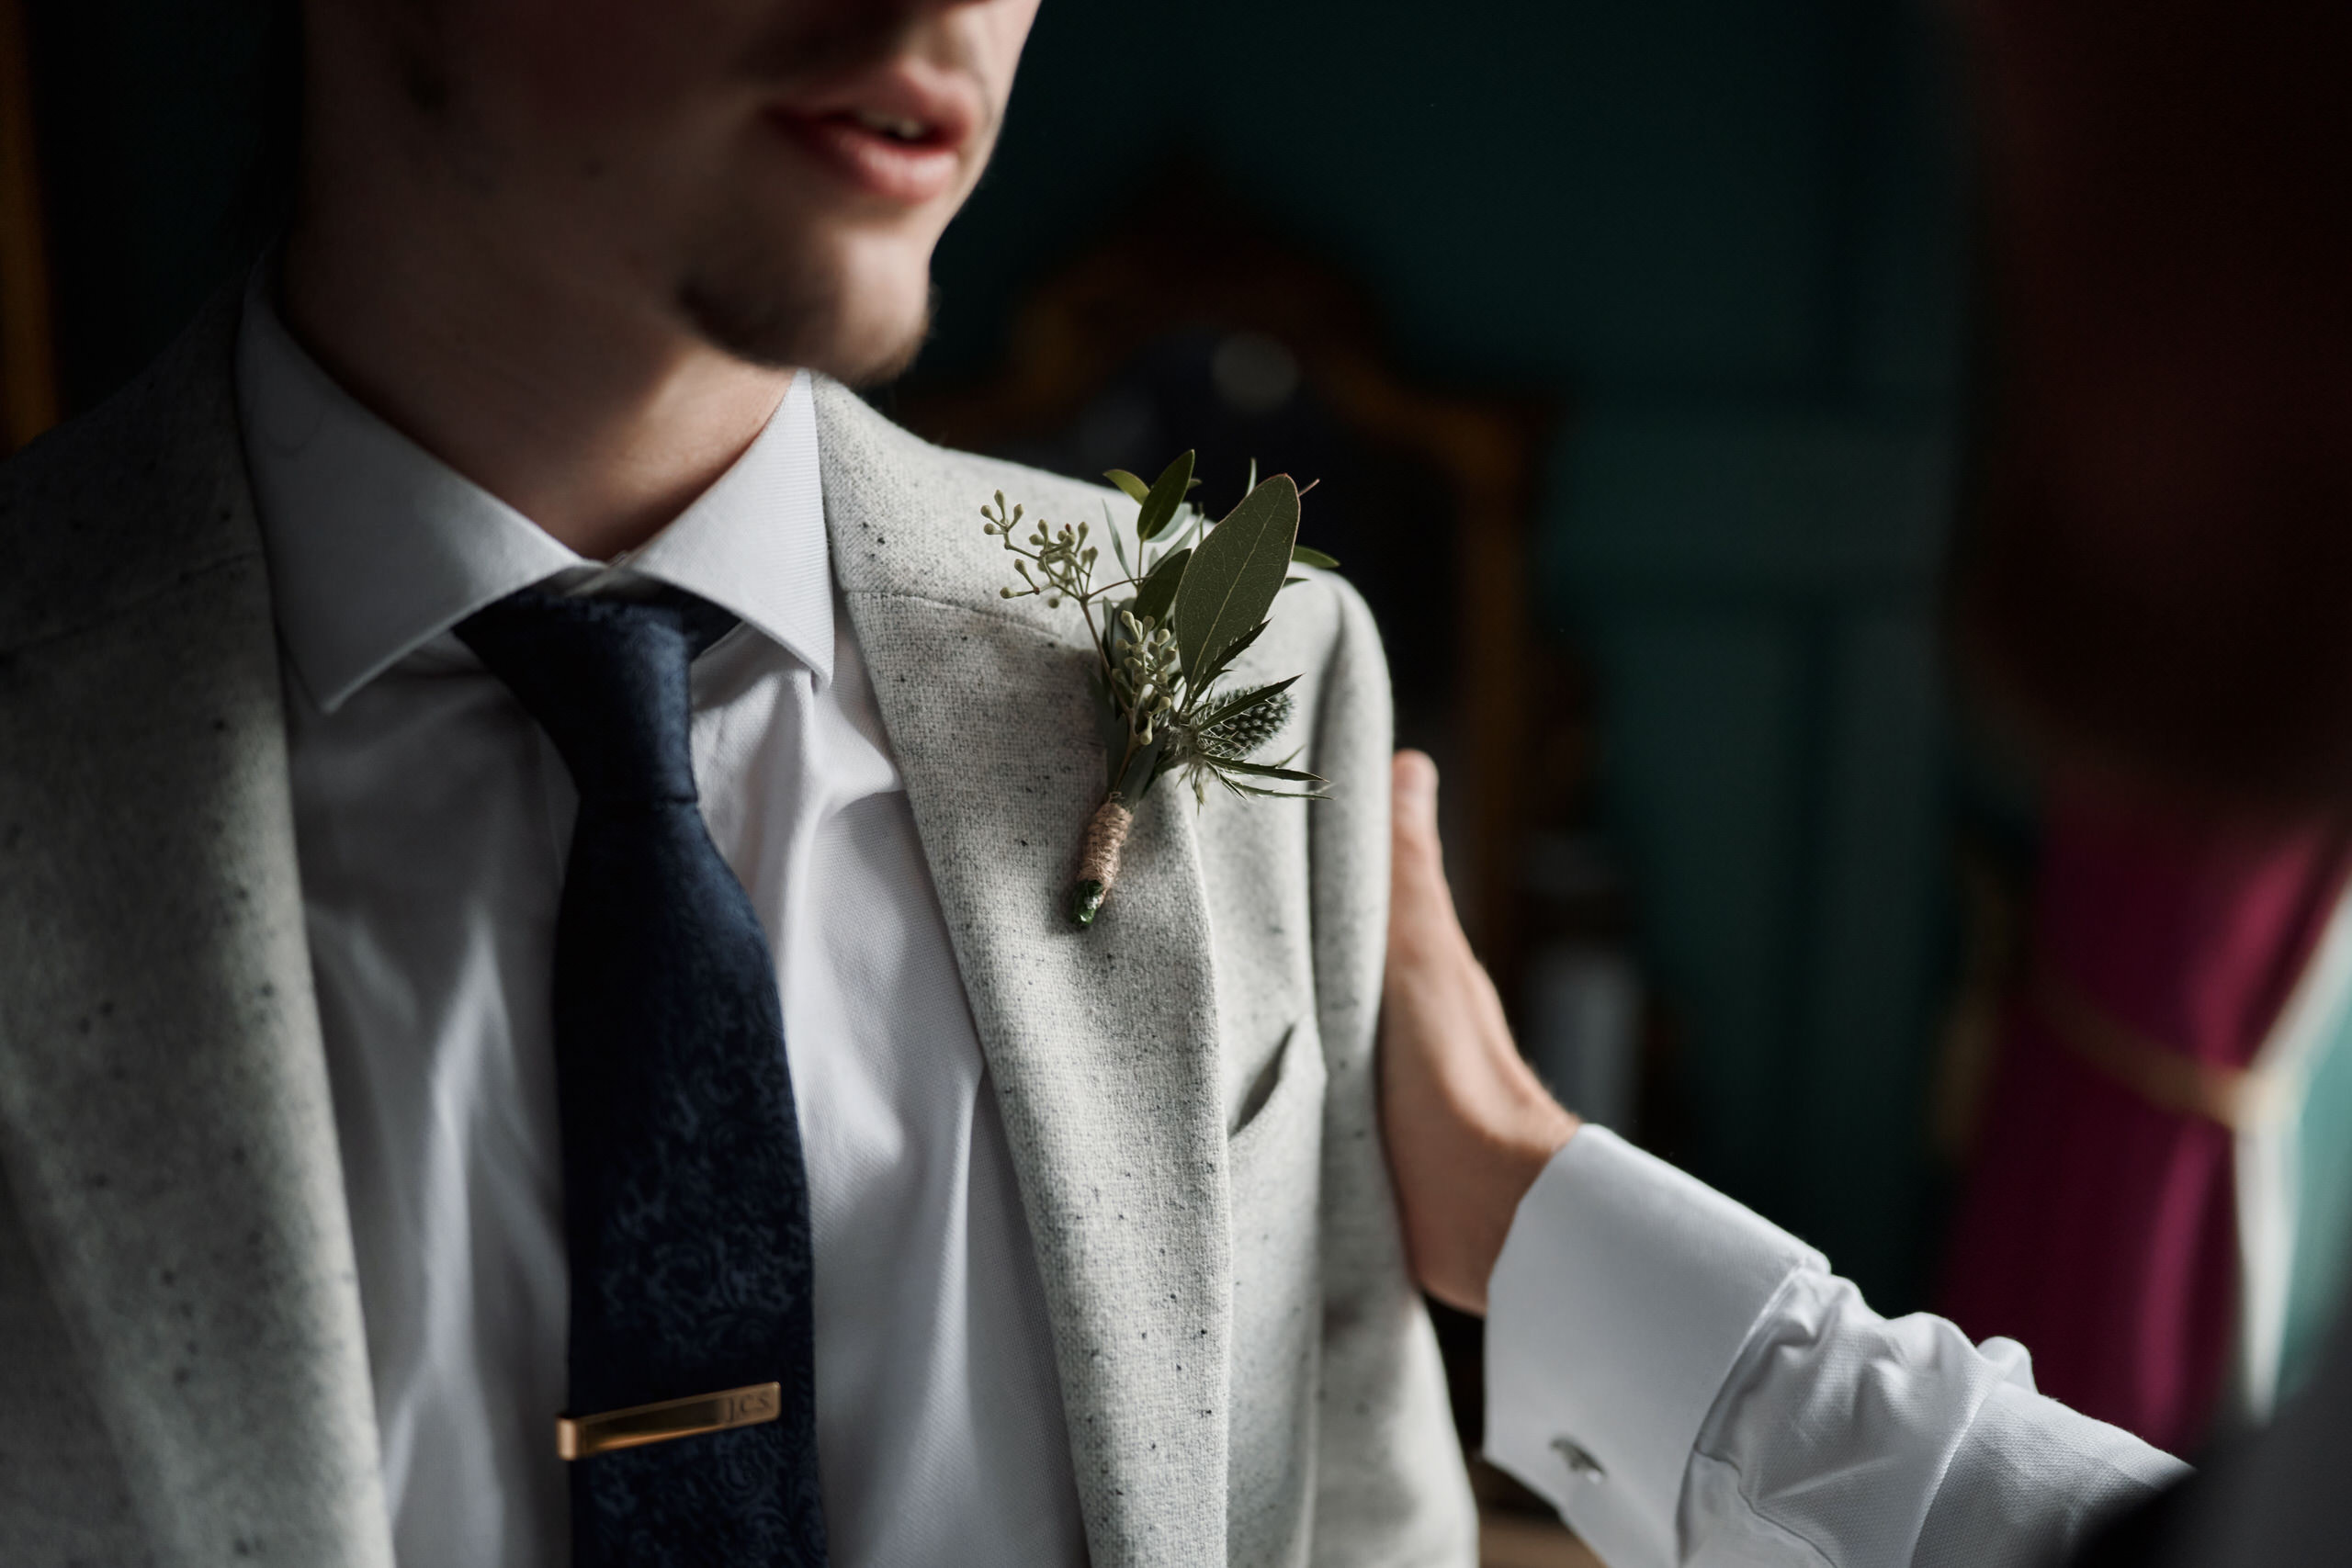 A guy is pinning a flower on a groom.